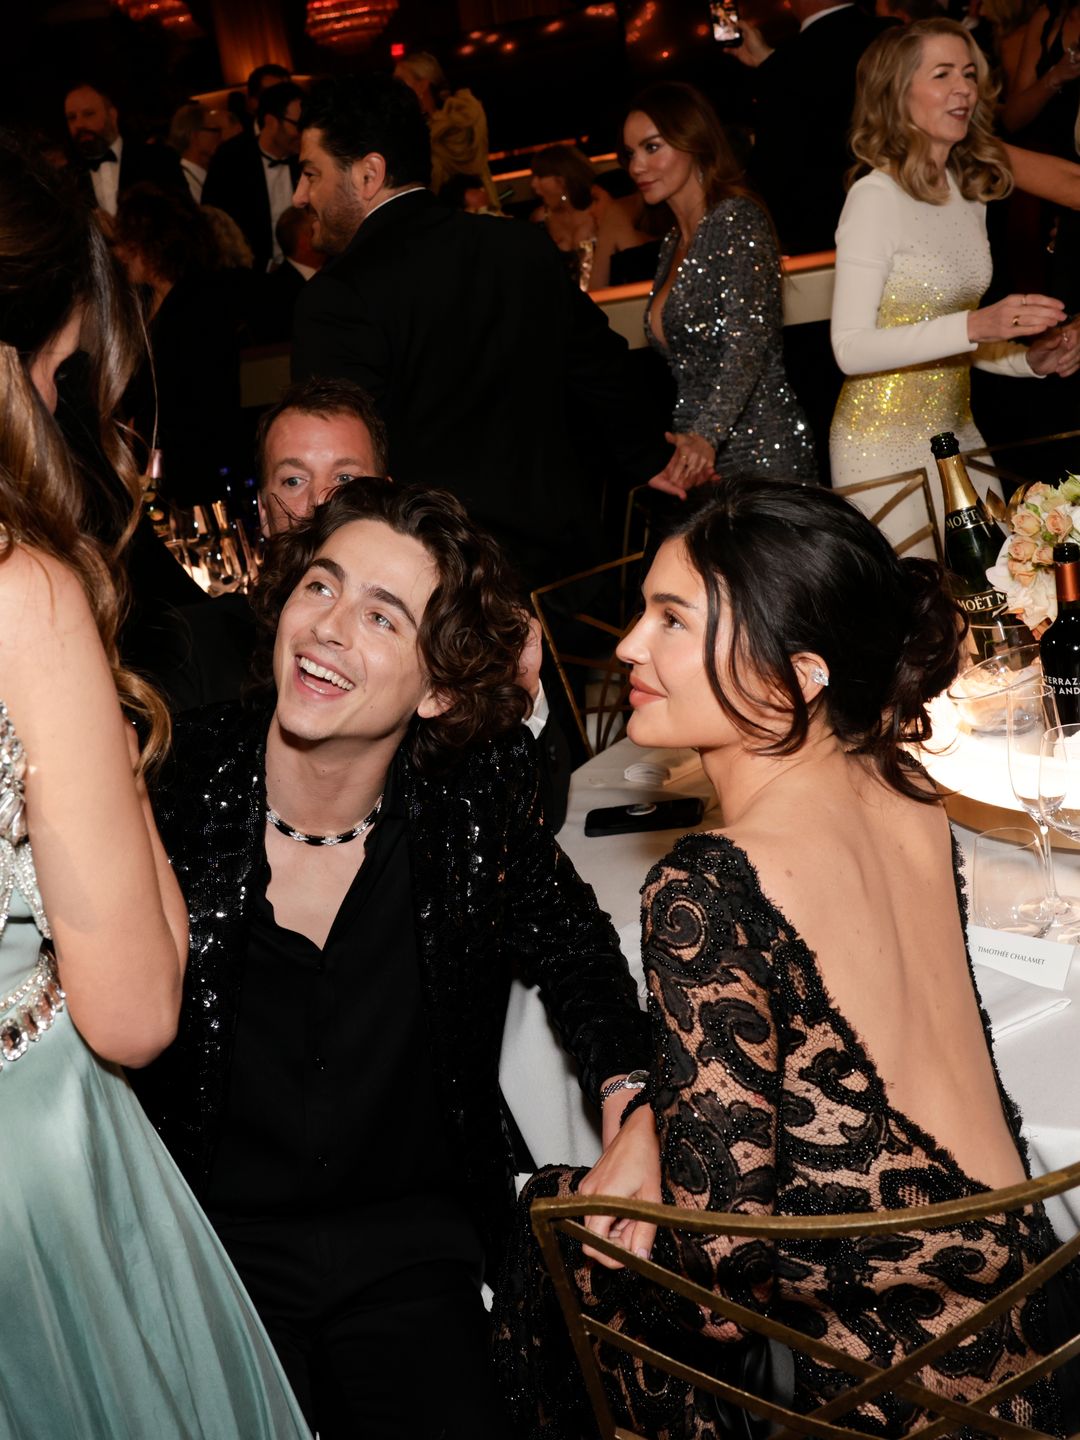 Kylie Jenner and Timothee Chalamet at the Golden Globe Awards earlier this month